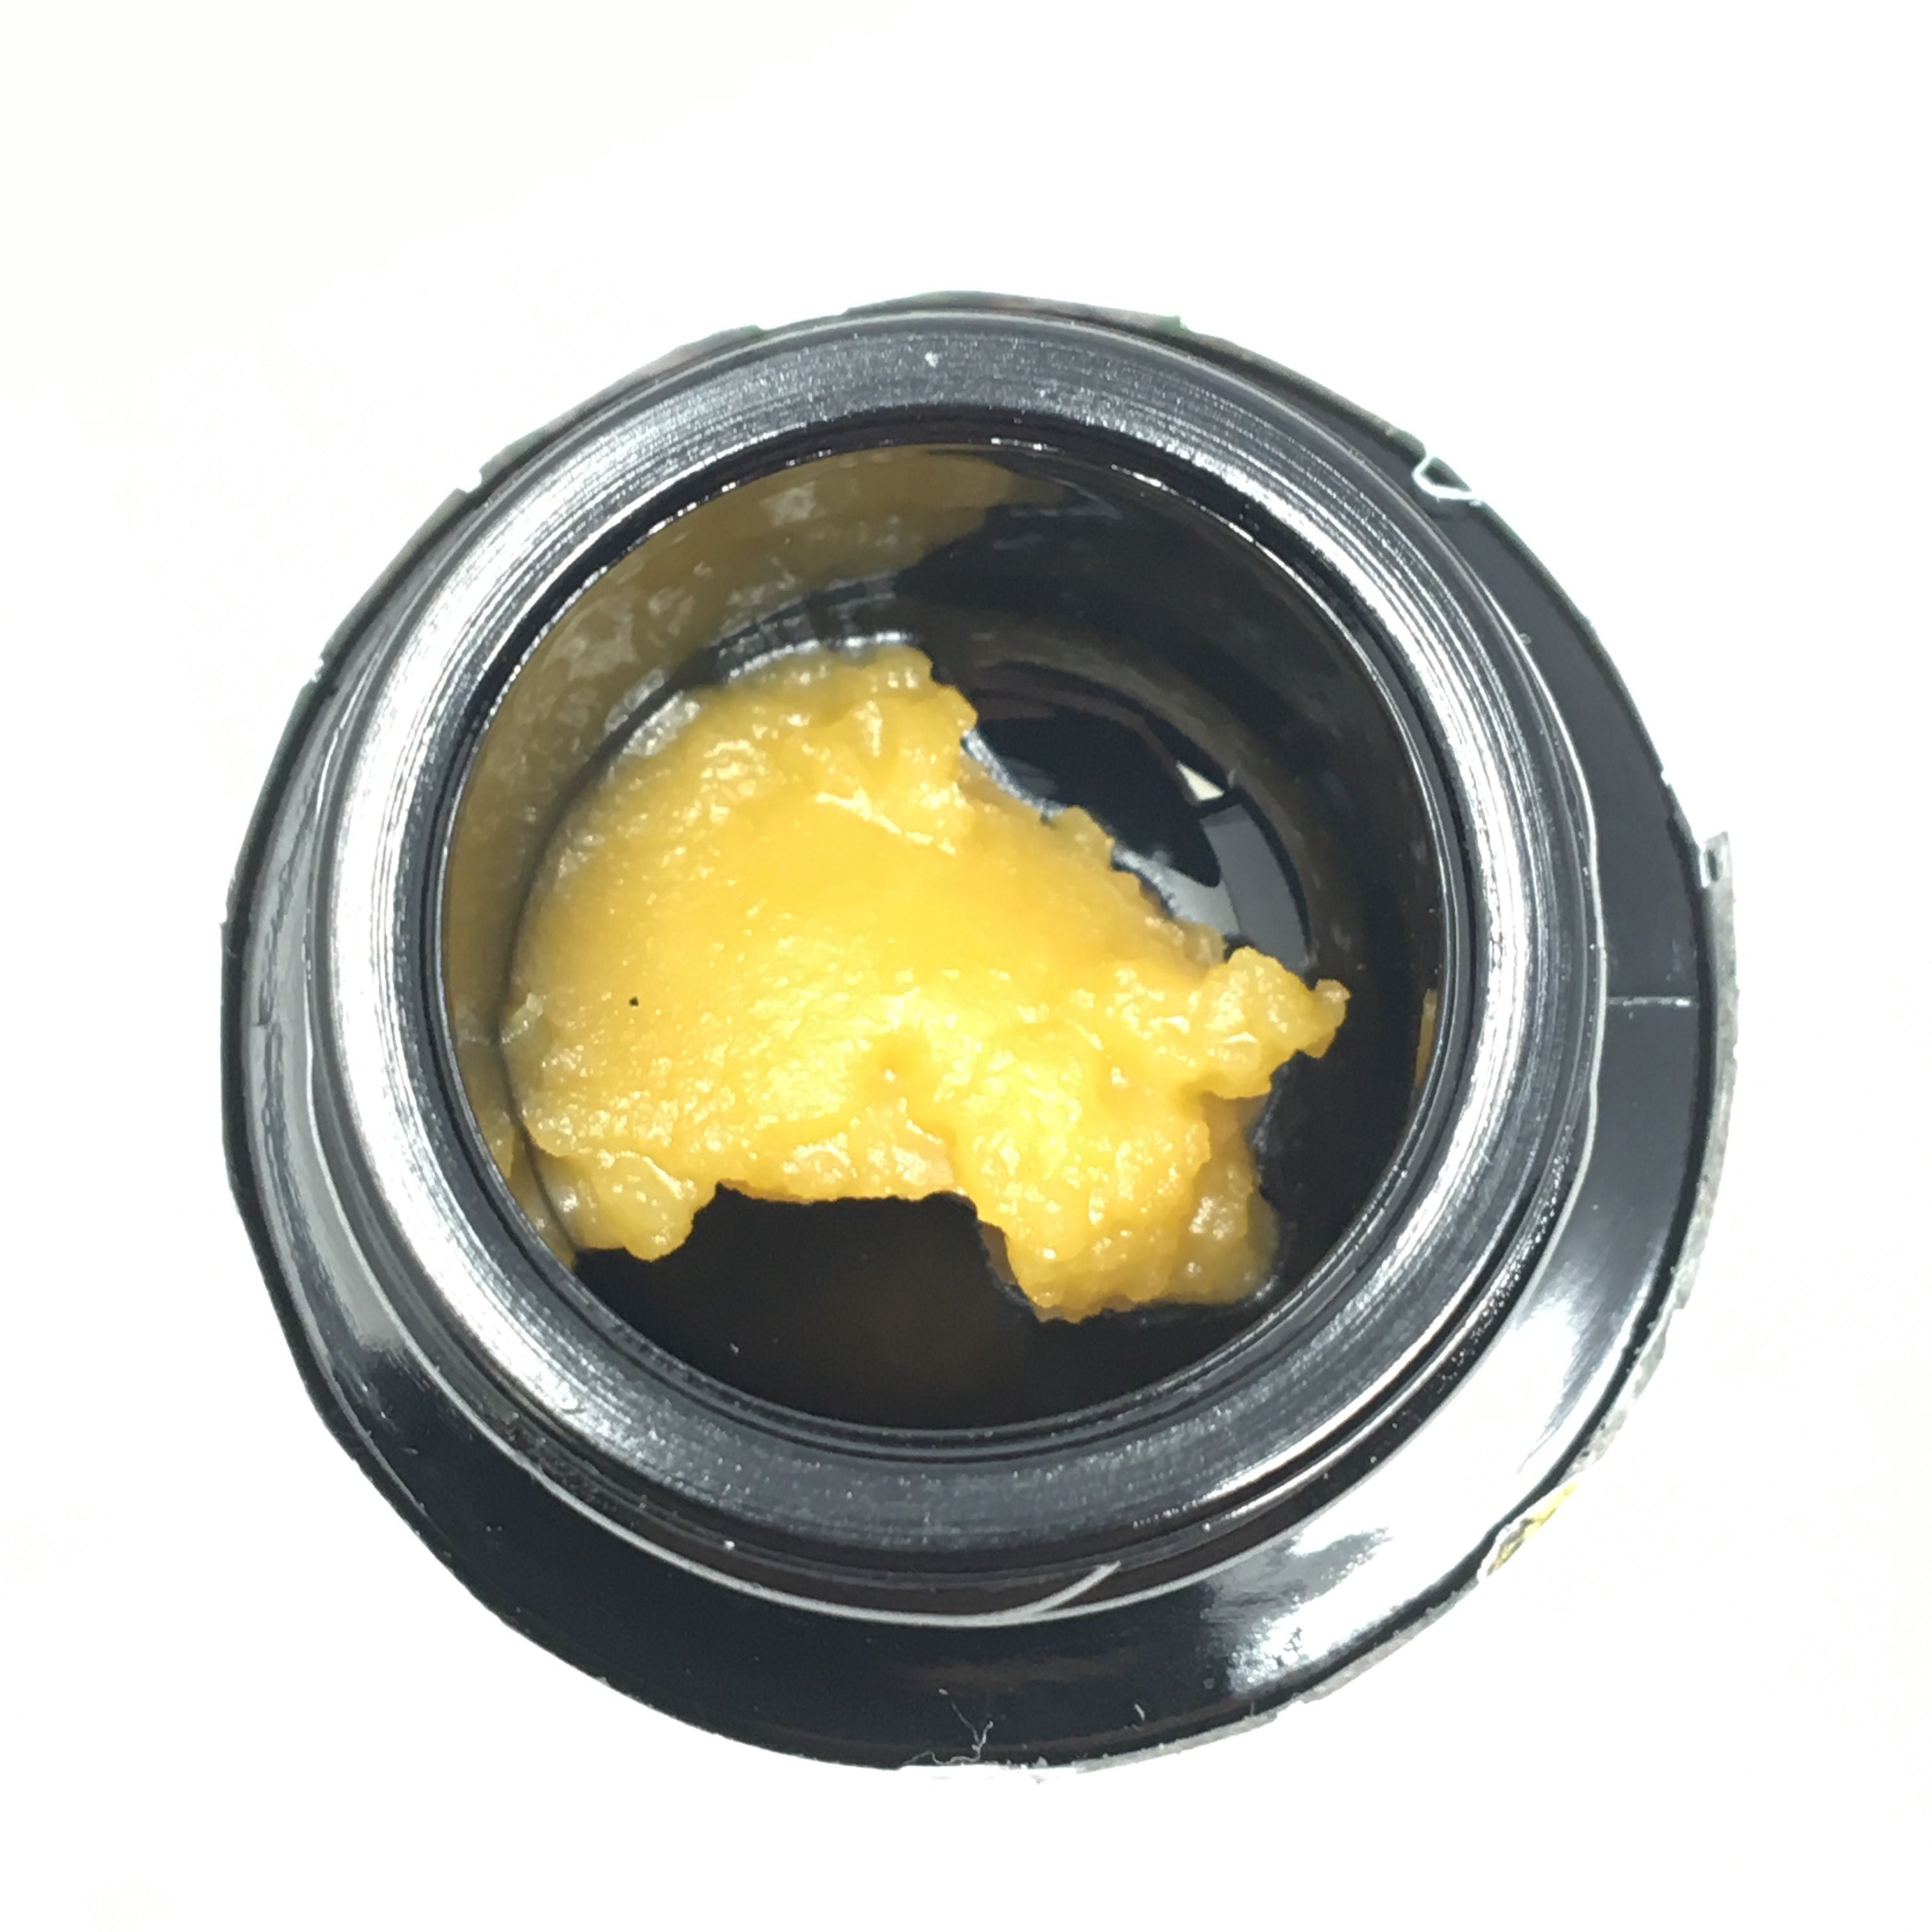 wax-zen-extracts-live-resin-budder-1g-mojito